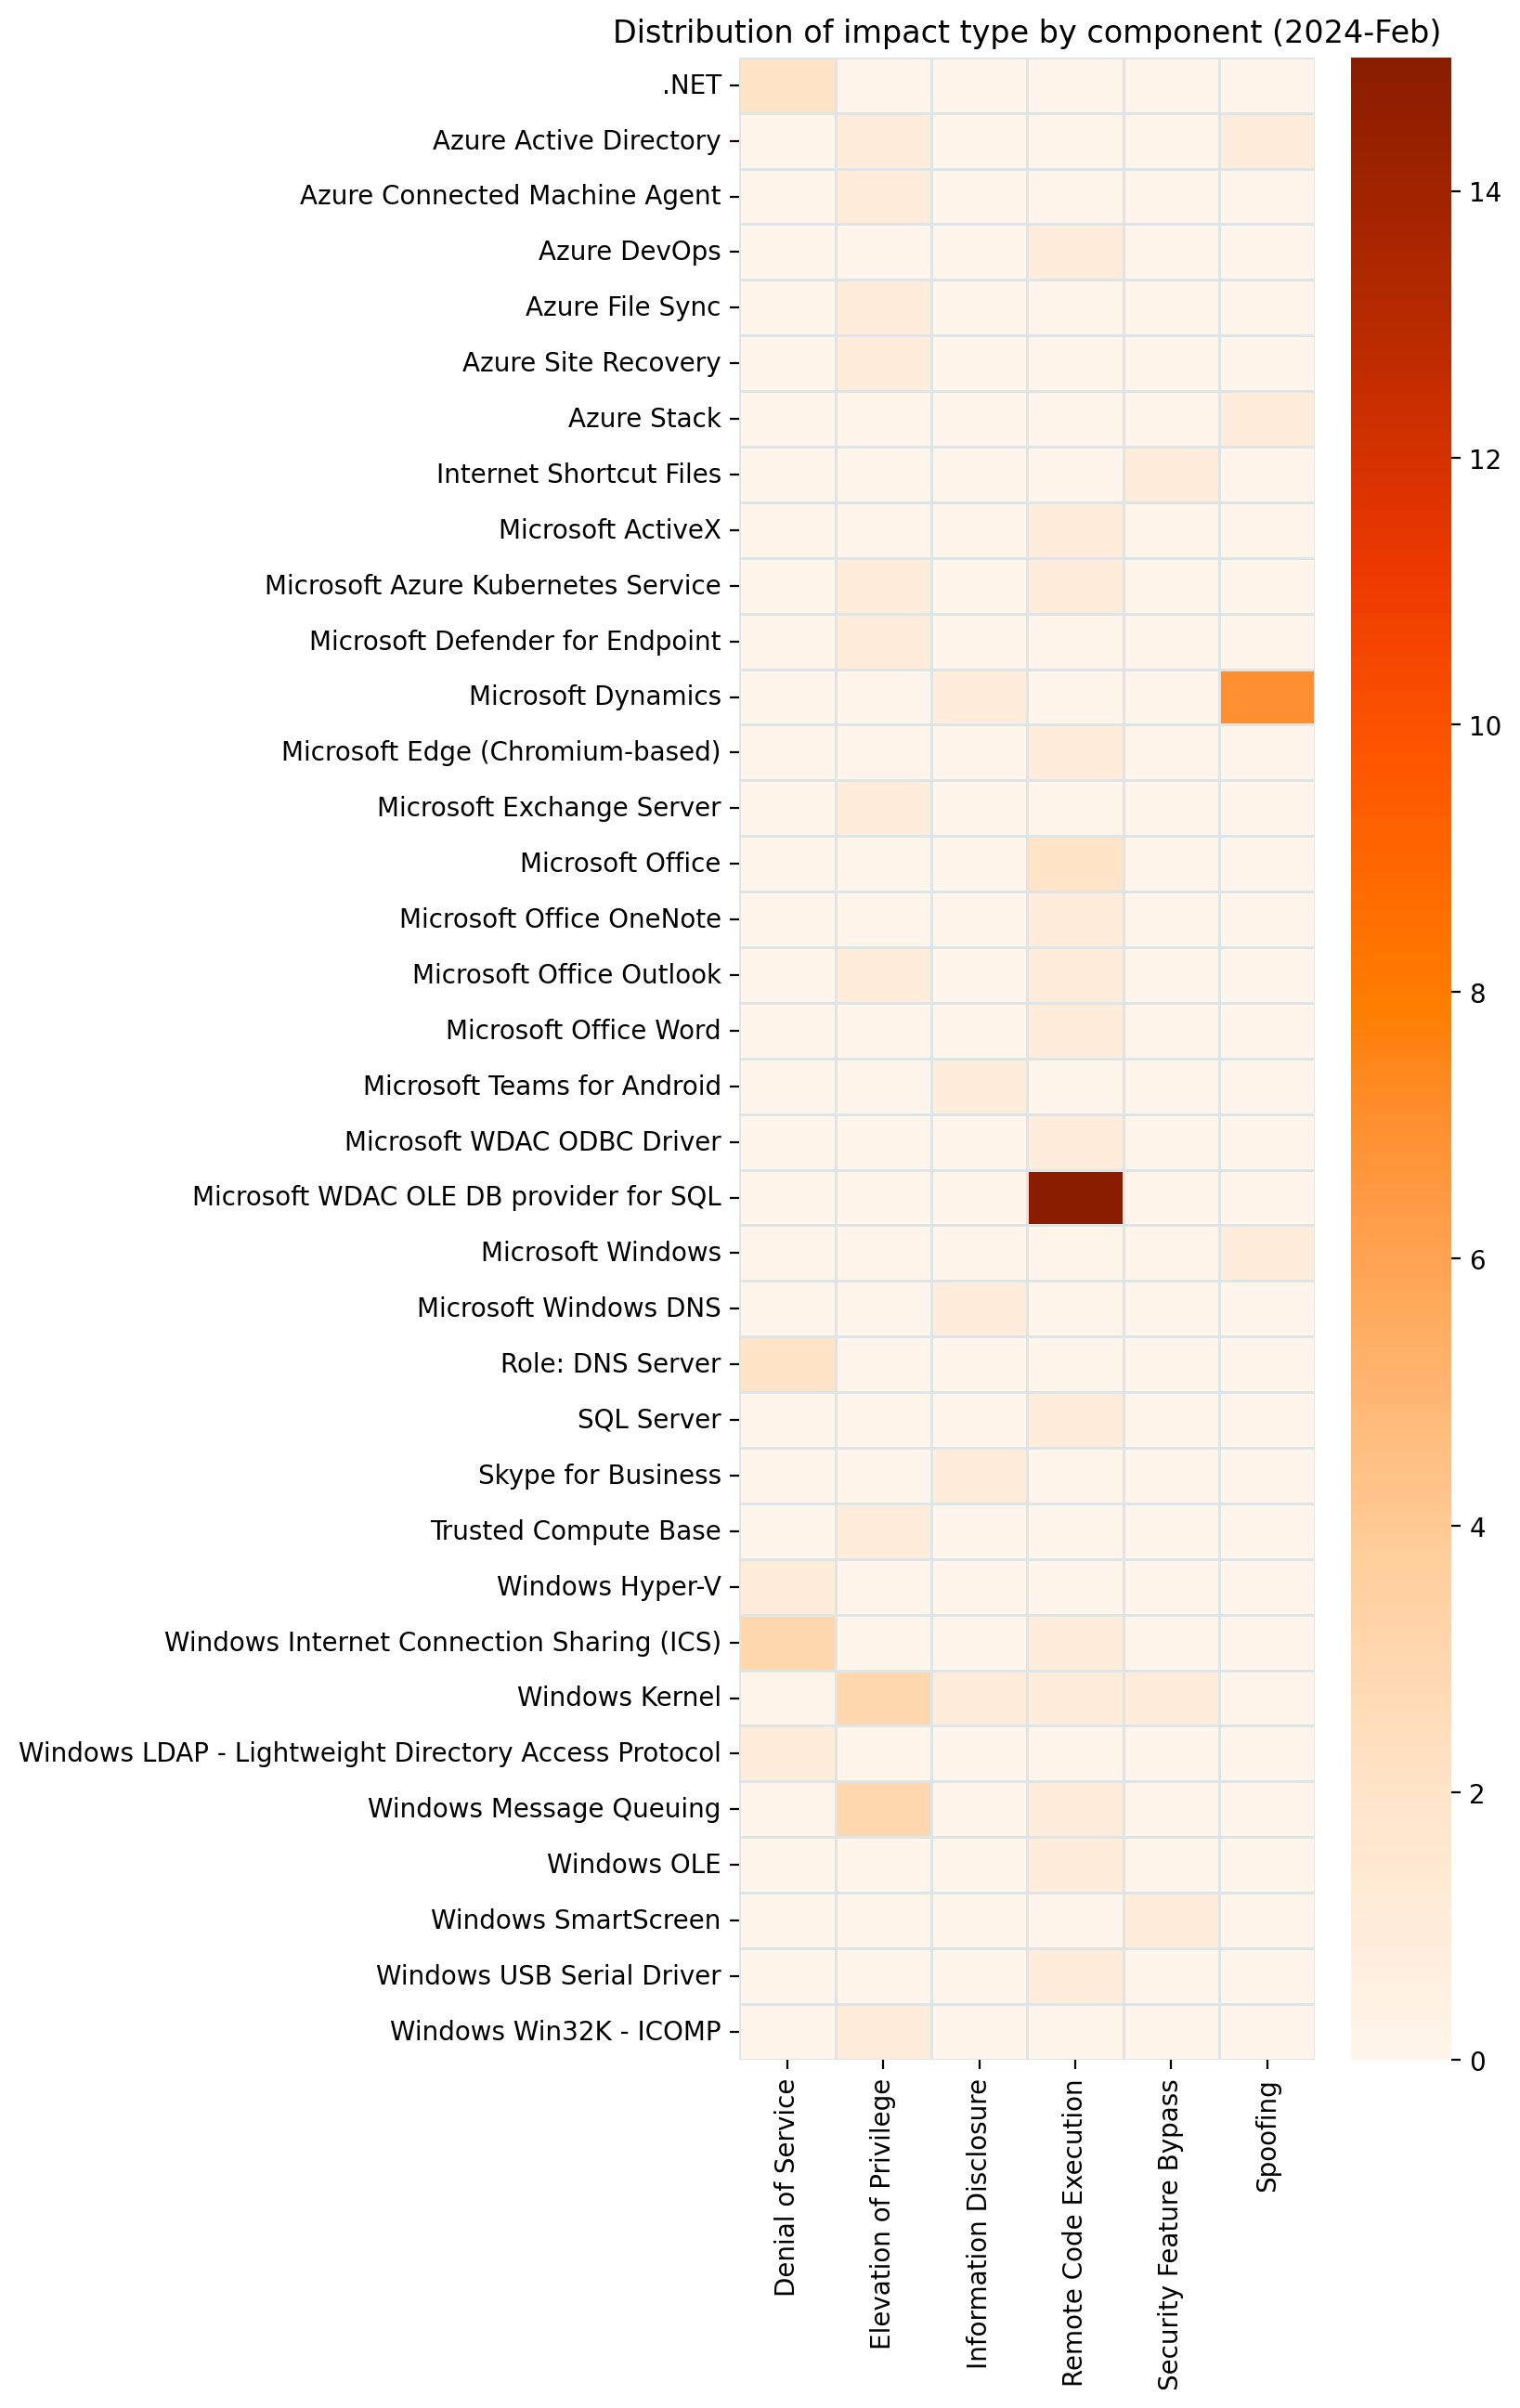 A heatmap showing the distribution of vulnerabilities by impact and affected component for Microsoft Patch Tuesday February